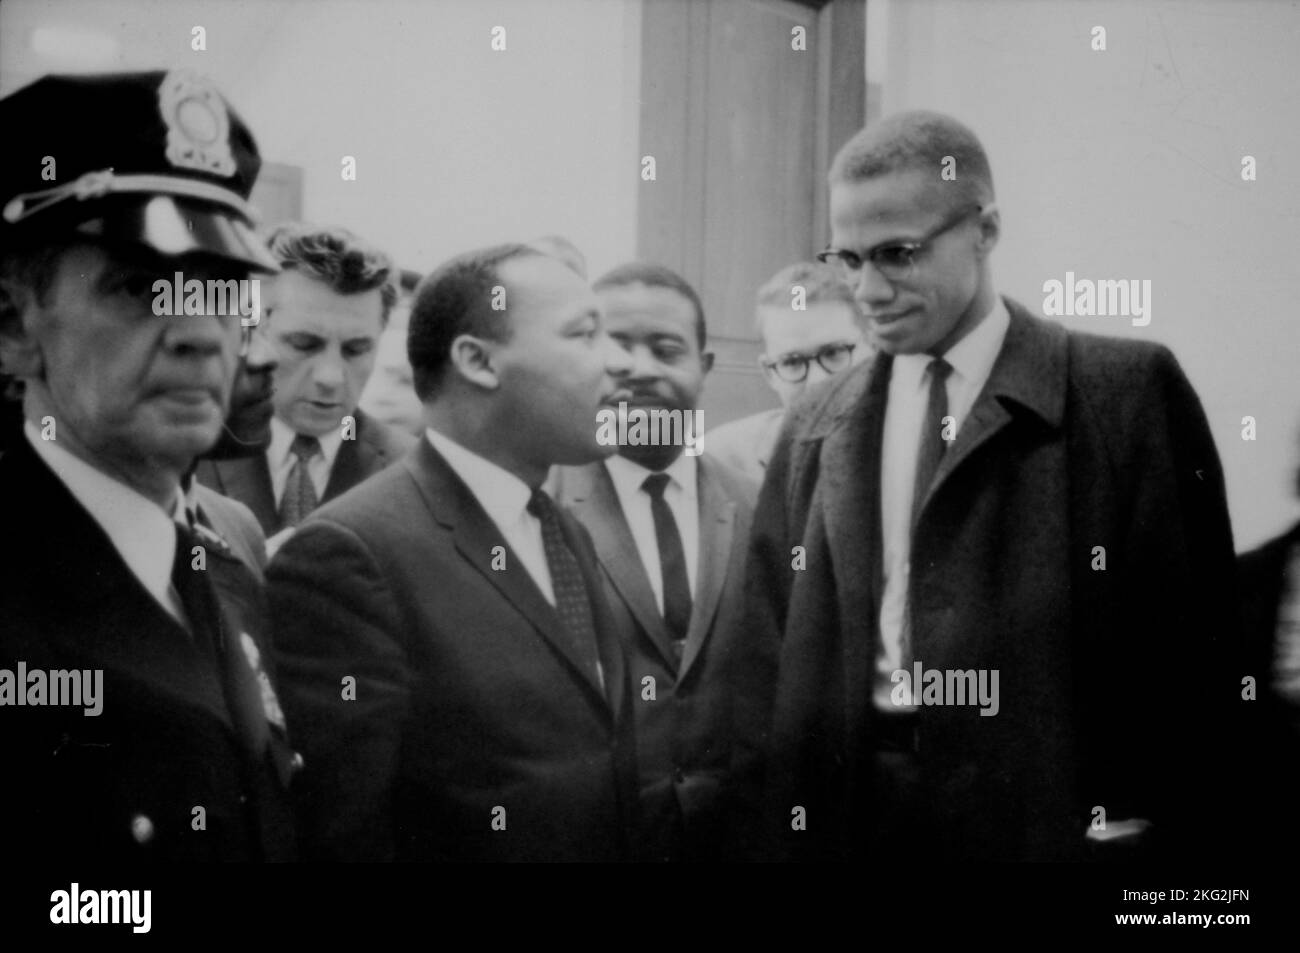 USA - 26 March 1964 - Civil Rights activists Martin Luther King and Malcolm X waiting for a press conference to begin - Photo: Geopix/Marion Trikosko Stock Photo